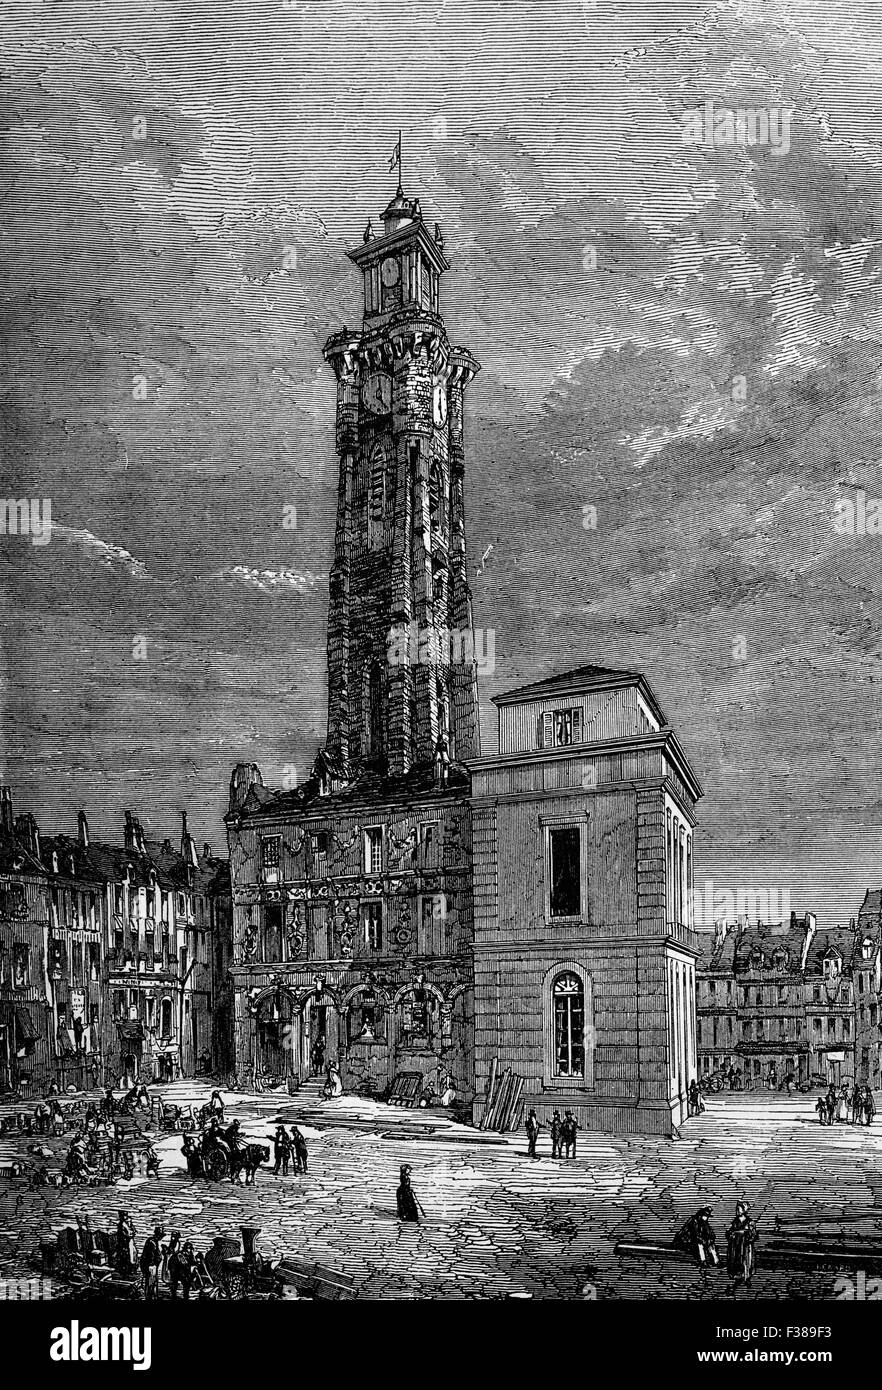 The Belfry of Valenciennes, a town in the Nord department in northern France. Site of a seige, 13 June and 28 July 1793, during the Flanders Campaign of the War of the First Coalition. Stock Photo